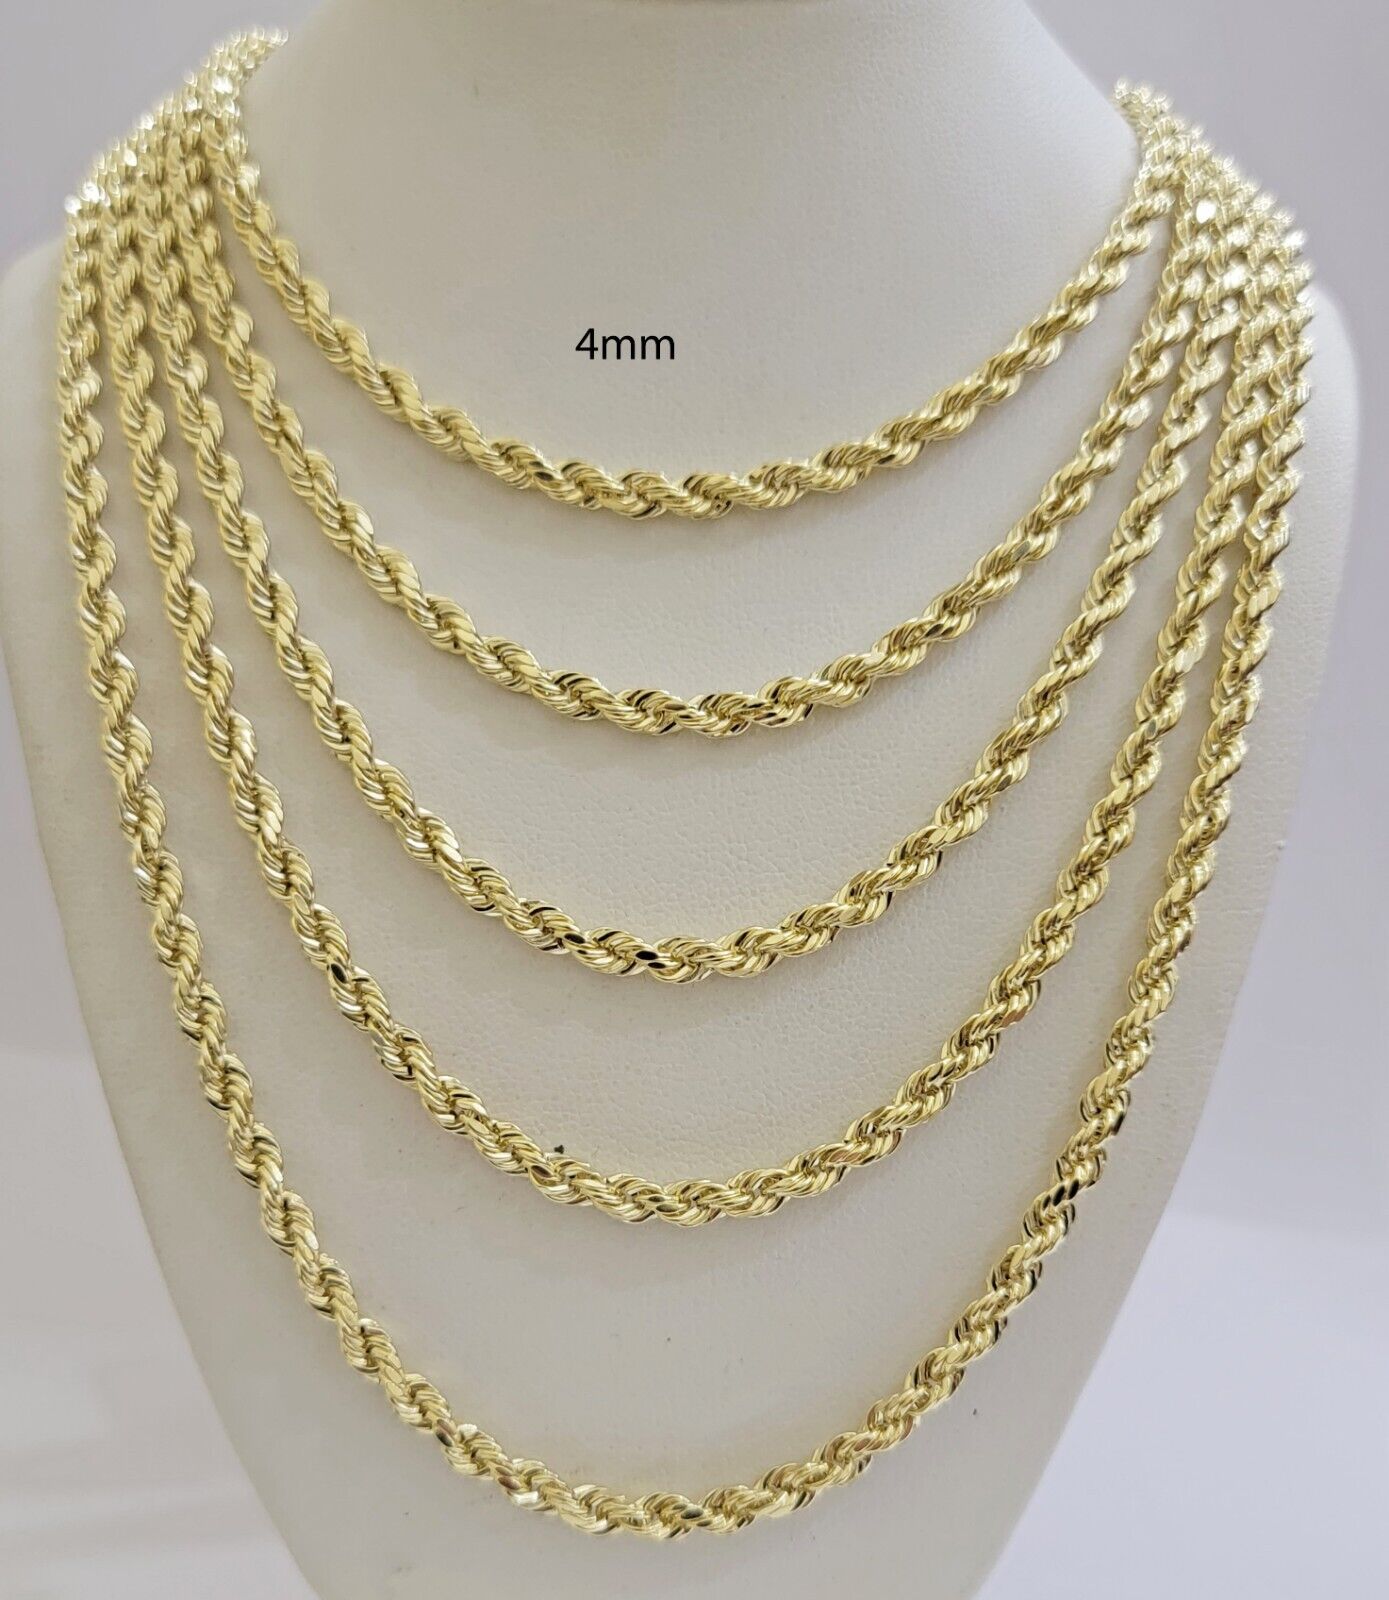 Real 14K Yellow Gold Rope Chain Necklace 2.5mm 3mm 4mm 5mm 18-26 inch Men Women 3mm / 20inch